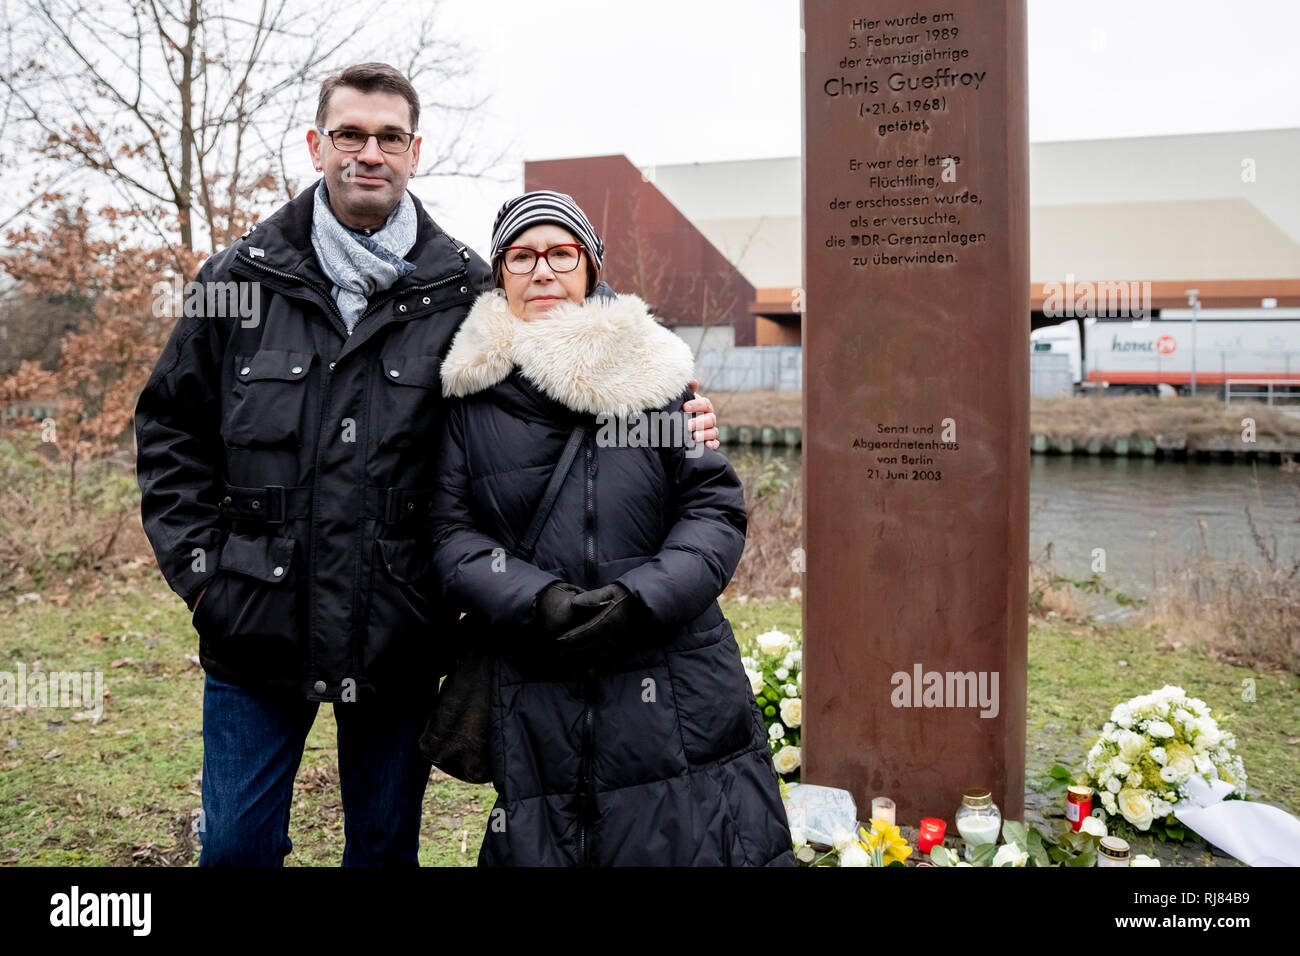 Berlin, Germany. 05th Feb, 2019. Stephan Gueffroy, brother of Chris Gueffroy, and Karin Gueffroy, mother of Chris Gueffroy, are commemorating the 30th anniversary of the death of Chris Gueffroy at a memorial stele on the Britzer branch canal. There Gueffroy was shot 30 years ago during an escape attempt at the Berlin Wall. He's the last person to die using a firearm. Credit: Christoph Soeder/dpa/Alamy Live News Stock Photo